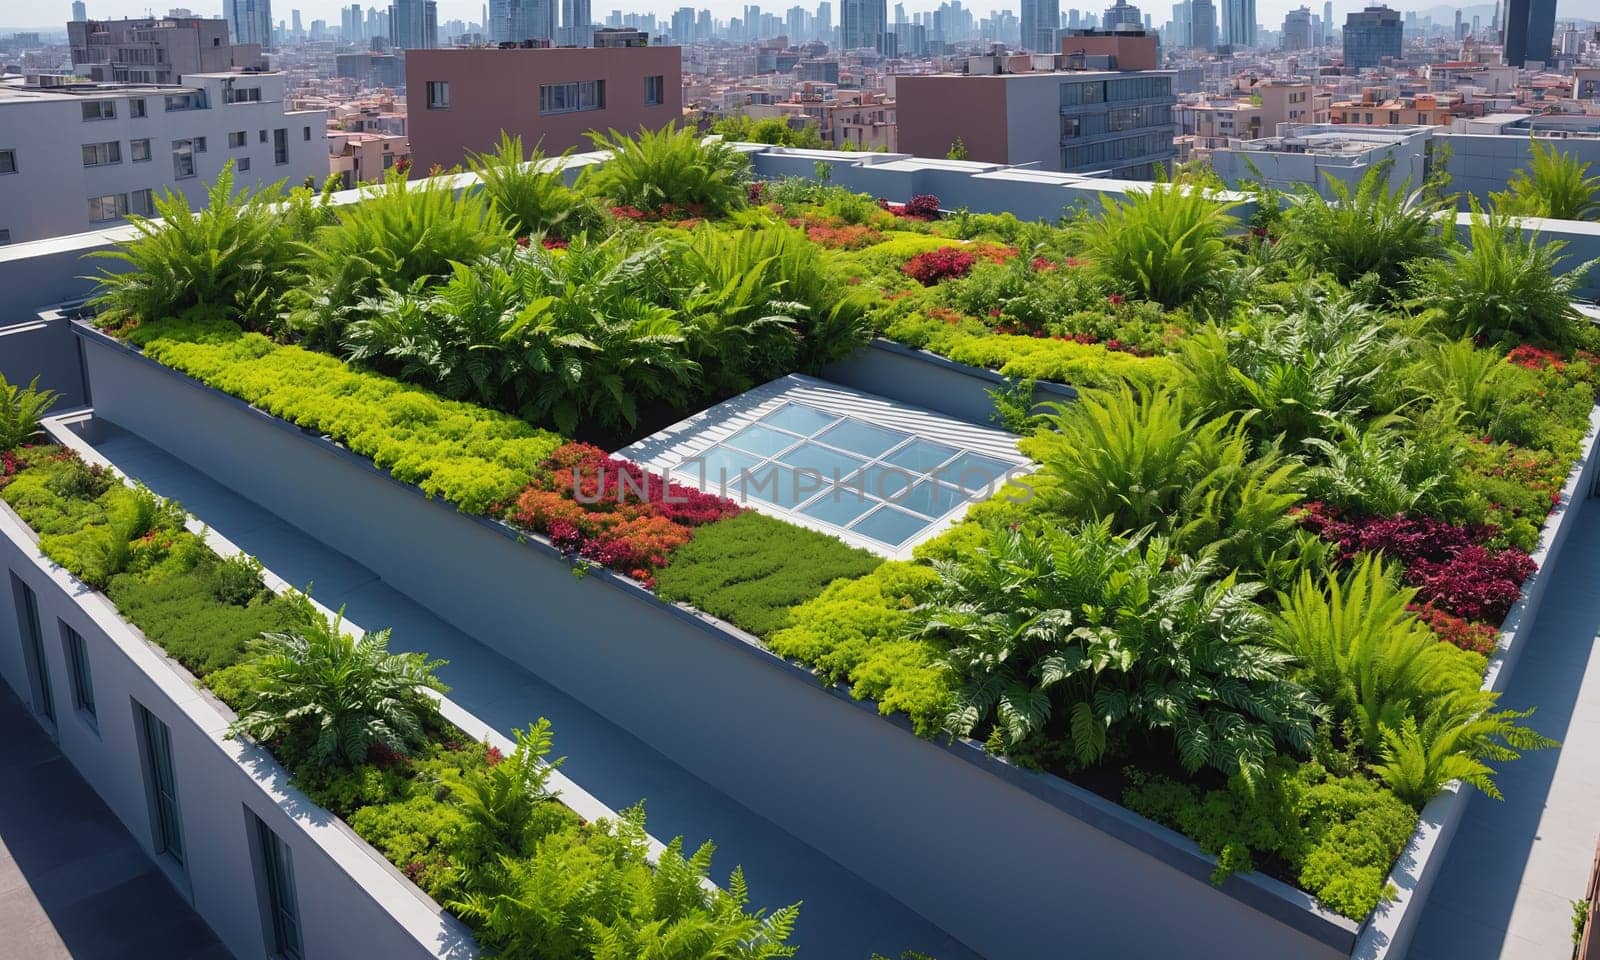 A lush green roof adorned with vibrant flowers sits atop a modern building amidst a bustling cityscape. The image shows the contrast between the natural and the artificial, the eco-friendly and the conventional, the organic and the geometric.